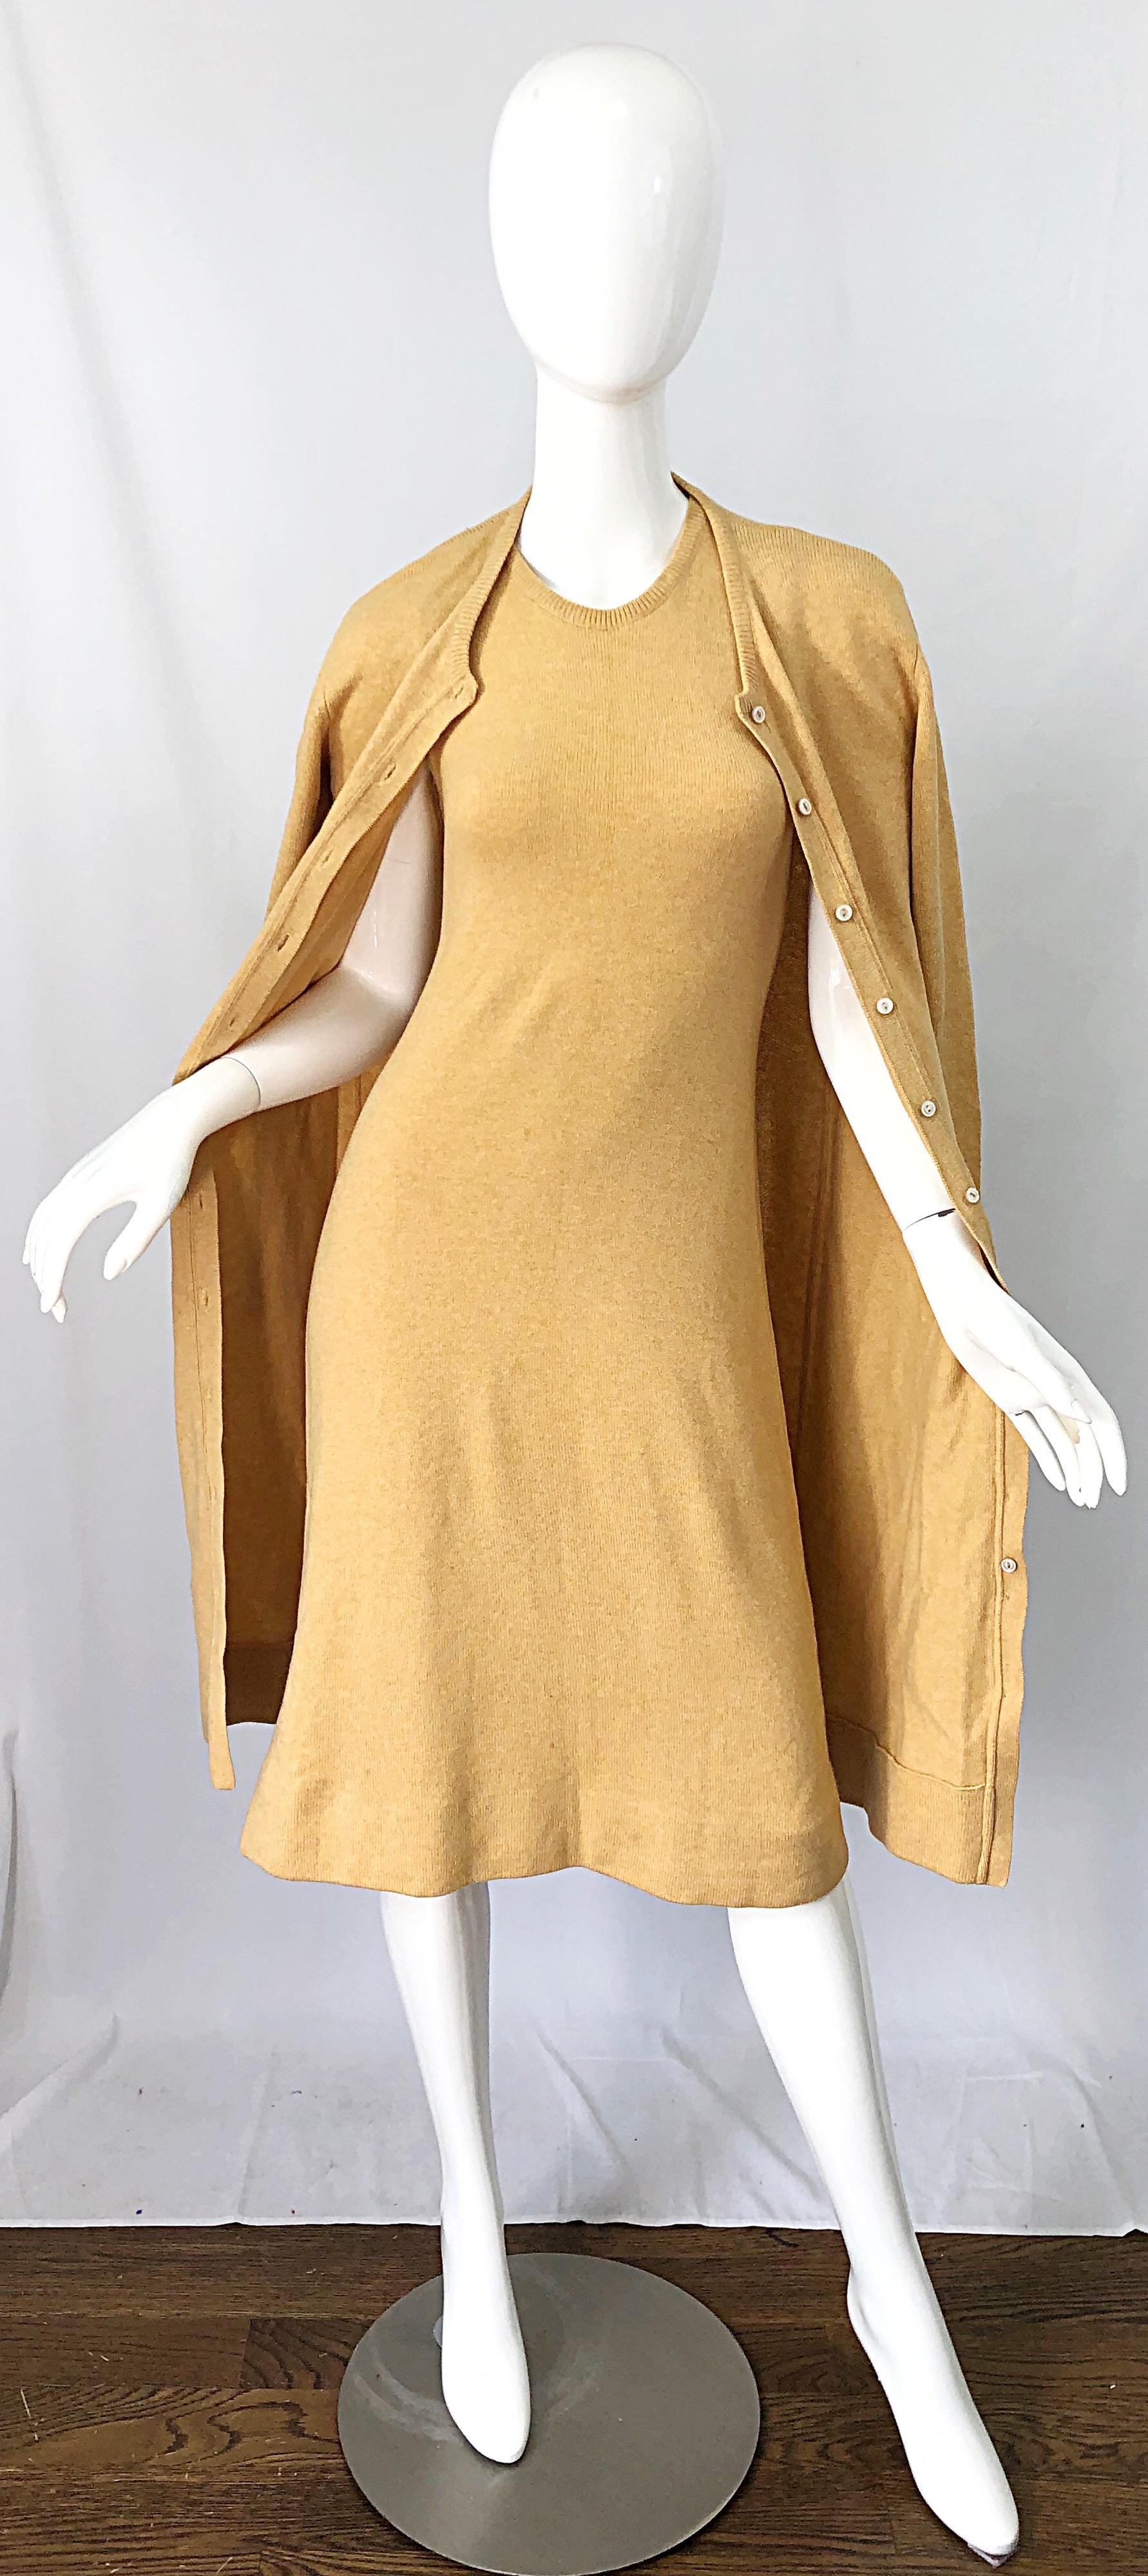 1970s HALSTON Cashmere Camel Tan 70s Vintage Dress and Cardigan Sweater Jacket For Sale 4